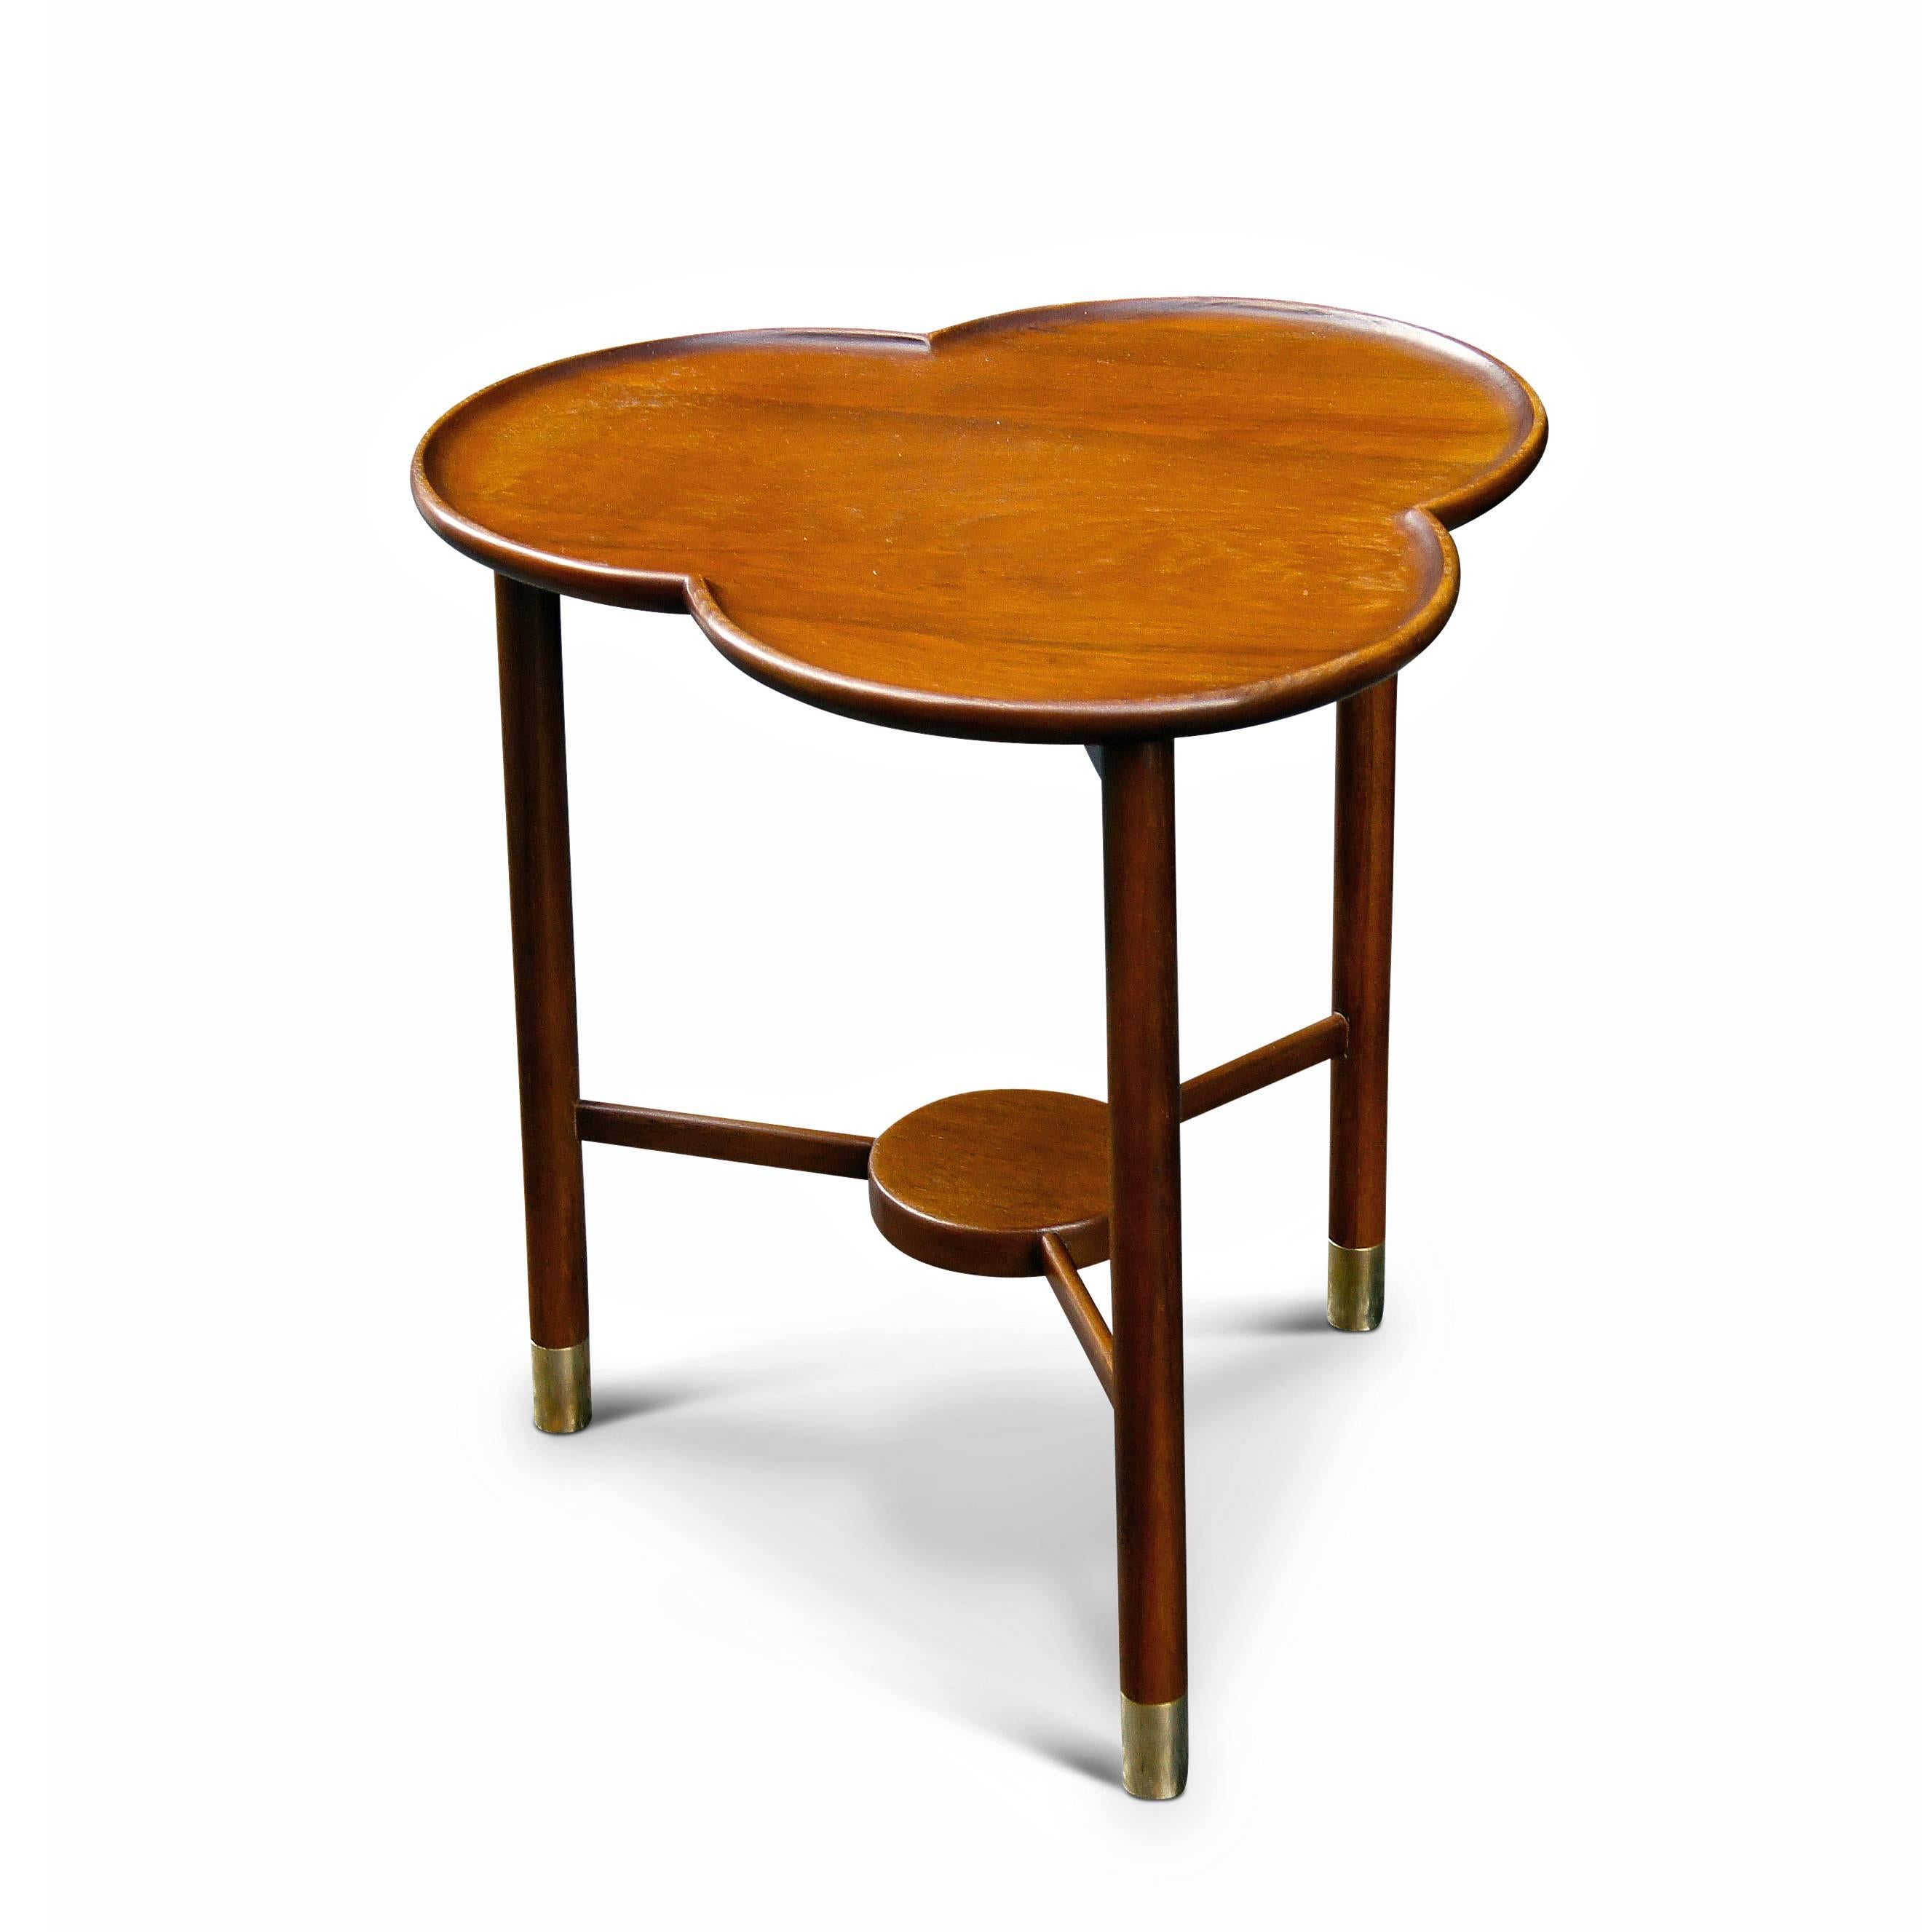 Occasional table having sculptural trefoil (three lobed) shape top with carved curving lip, supported on a three leg base with stretchers, exhibiting a fine degree of craftsmanship, executed in oak with brass sabots, Denmark, mid-20th century.

 